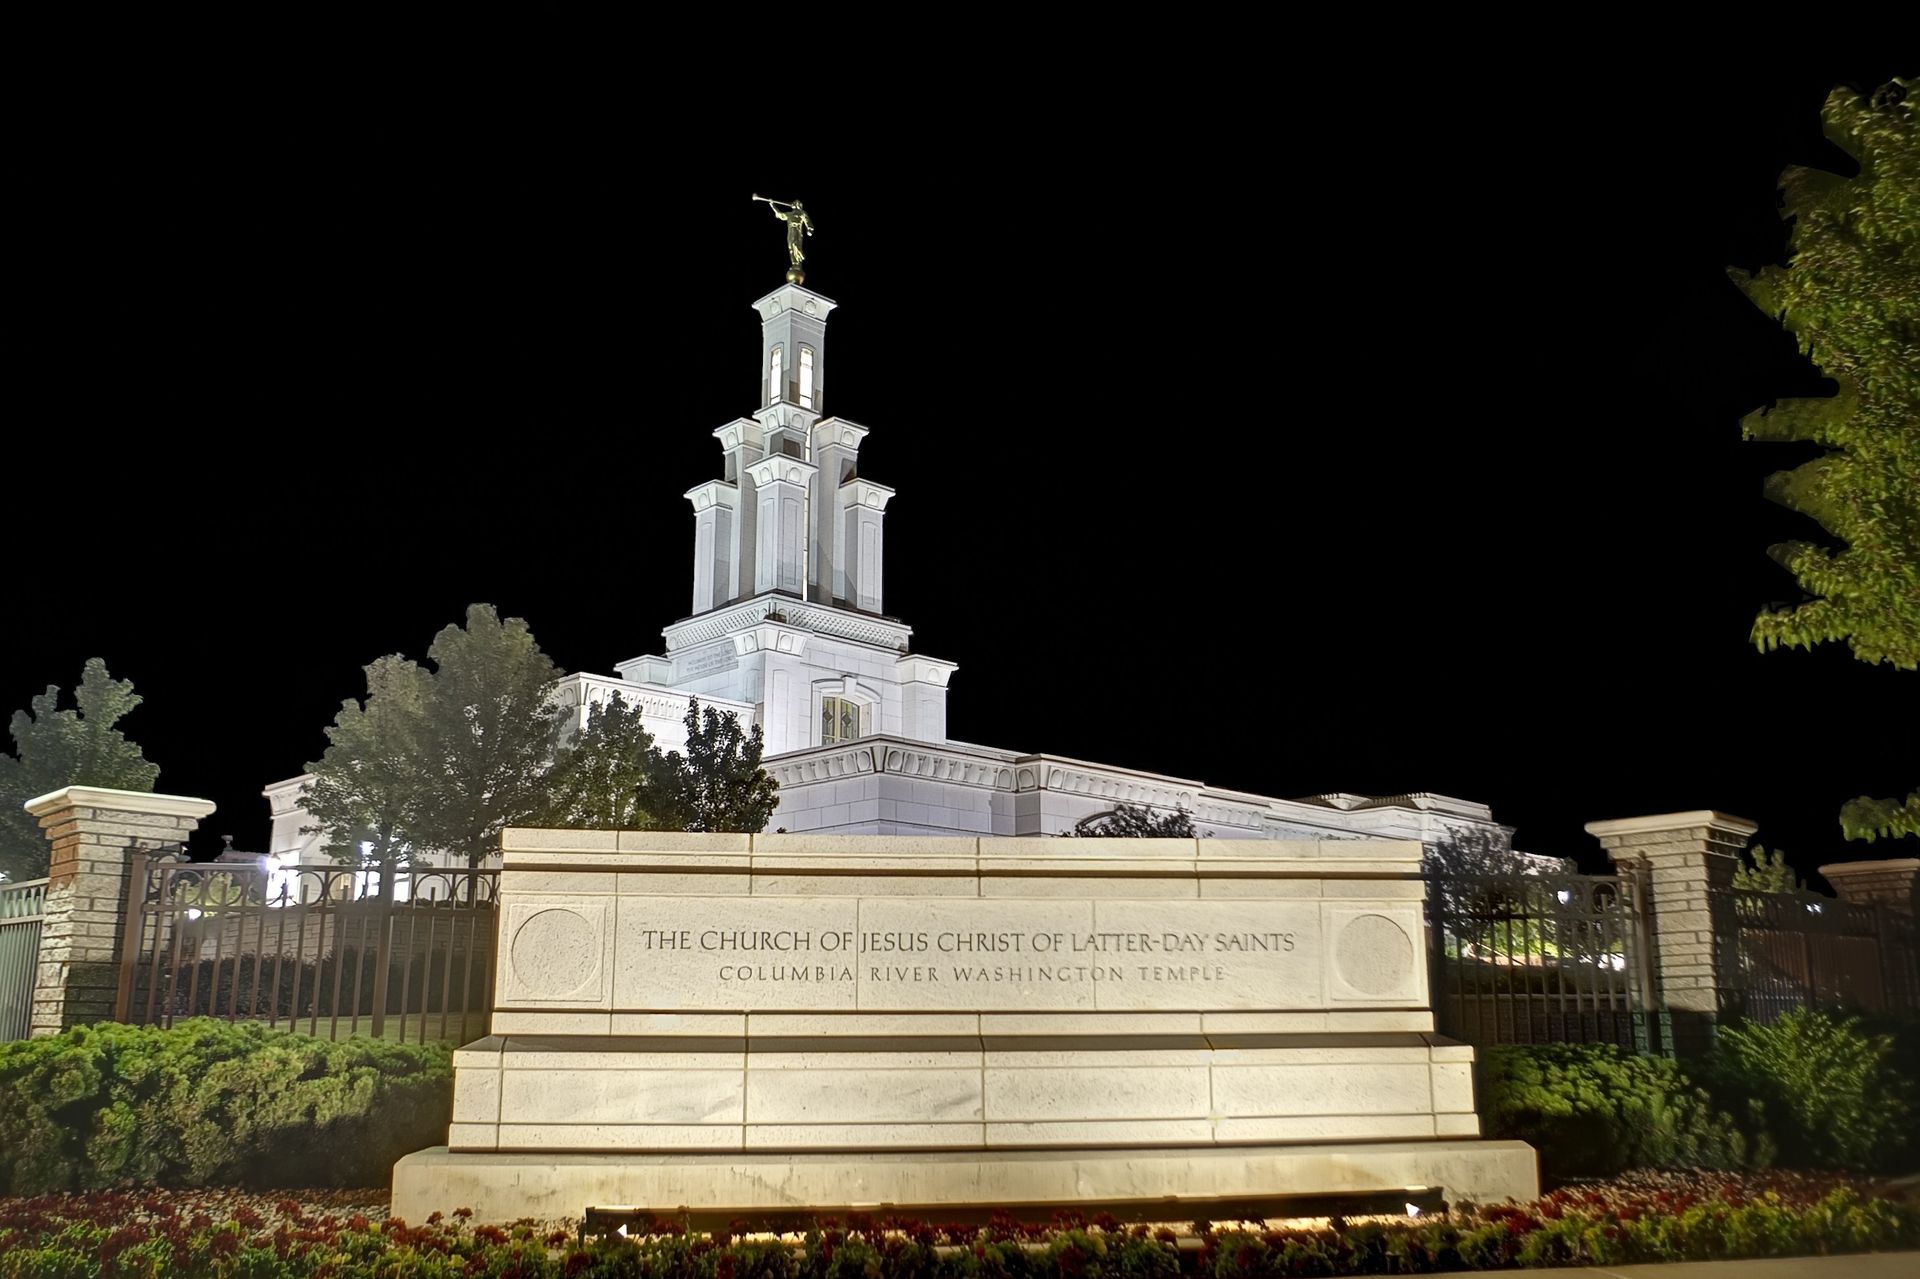 The temple name sign of the Columbia River Washington Temple is lit up at night.